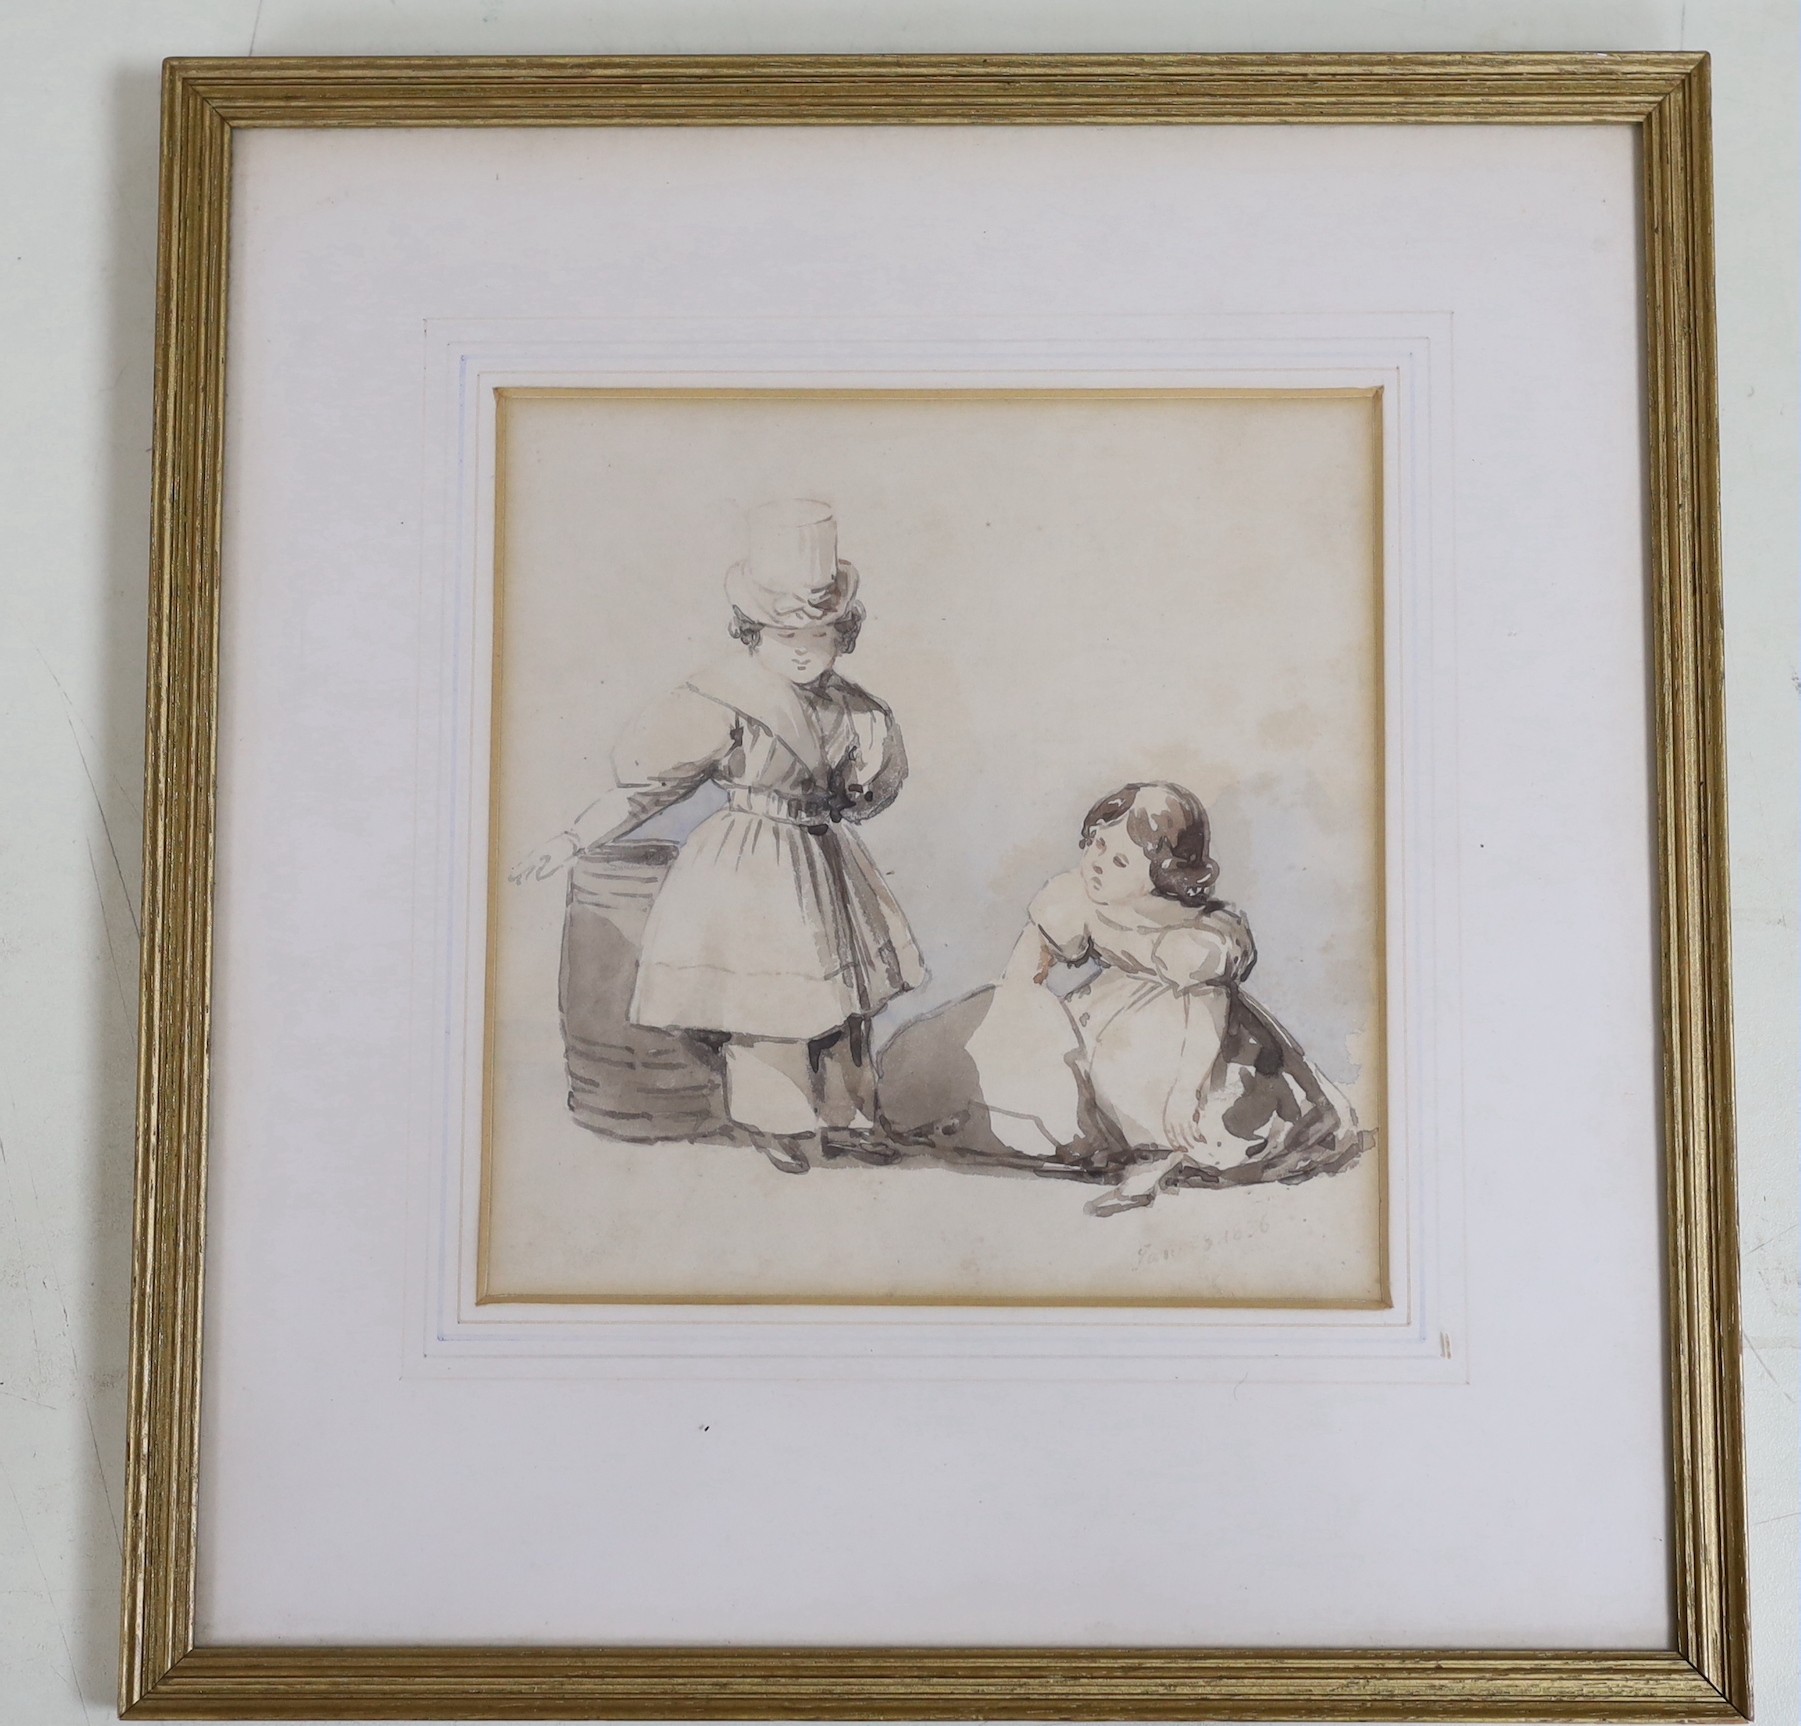 James (19th C.), watercolour, Study of two children, dated 1856, 17 x 16cm - Image 2 of 2